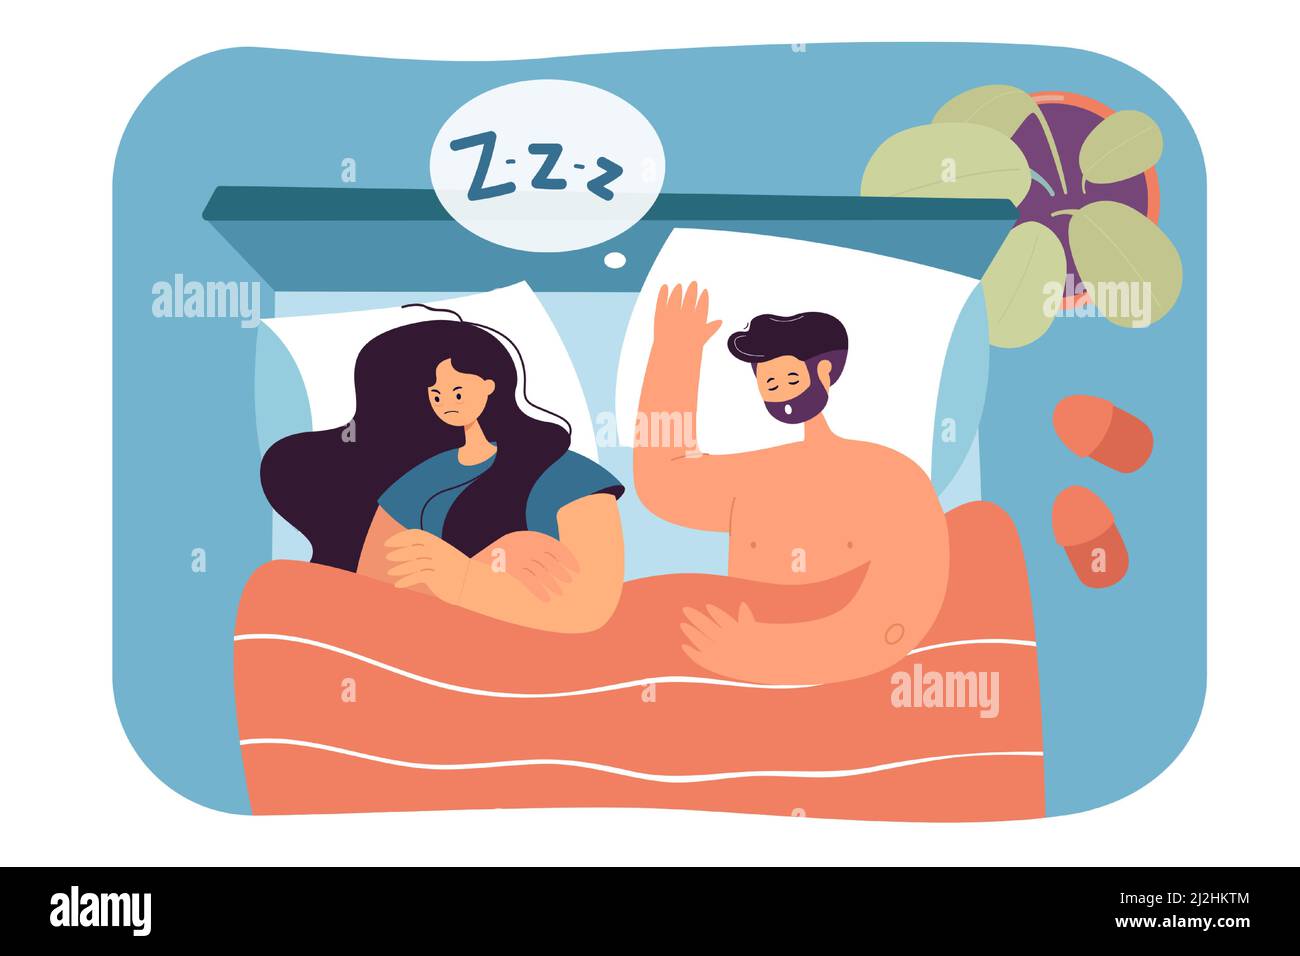 Couple Sleeping Together In Bed Stock Vector Images Alamy